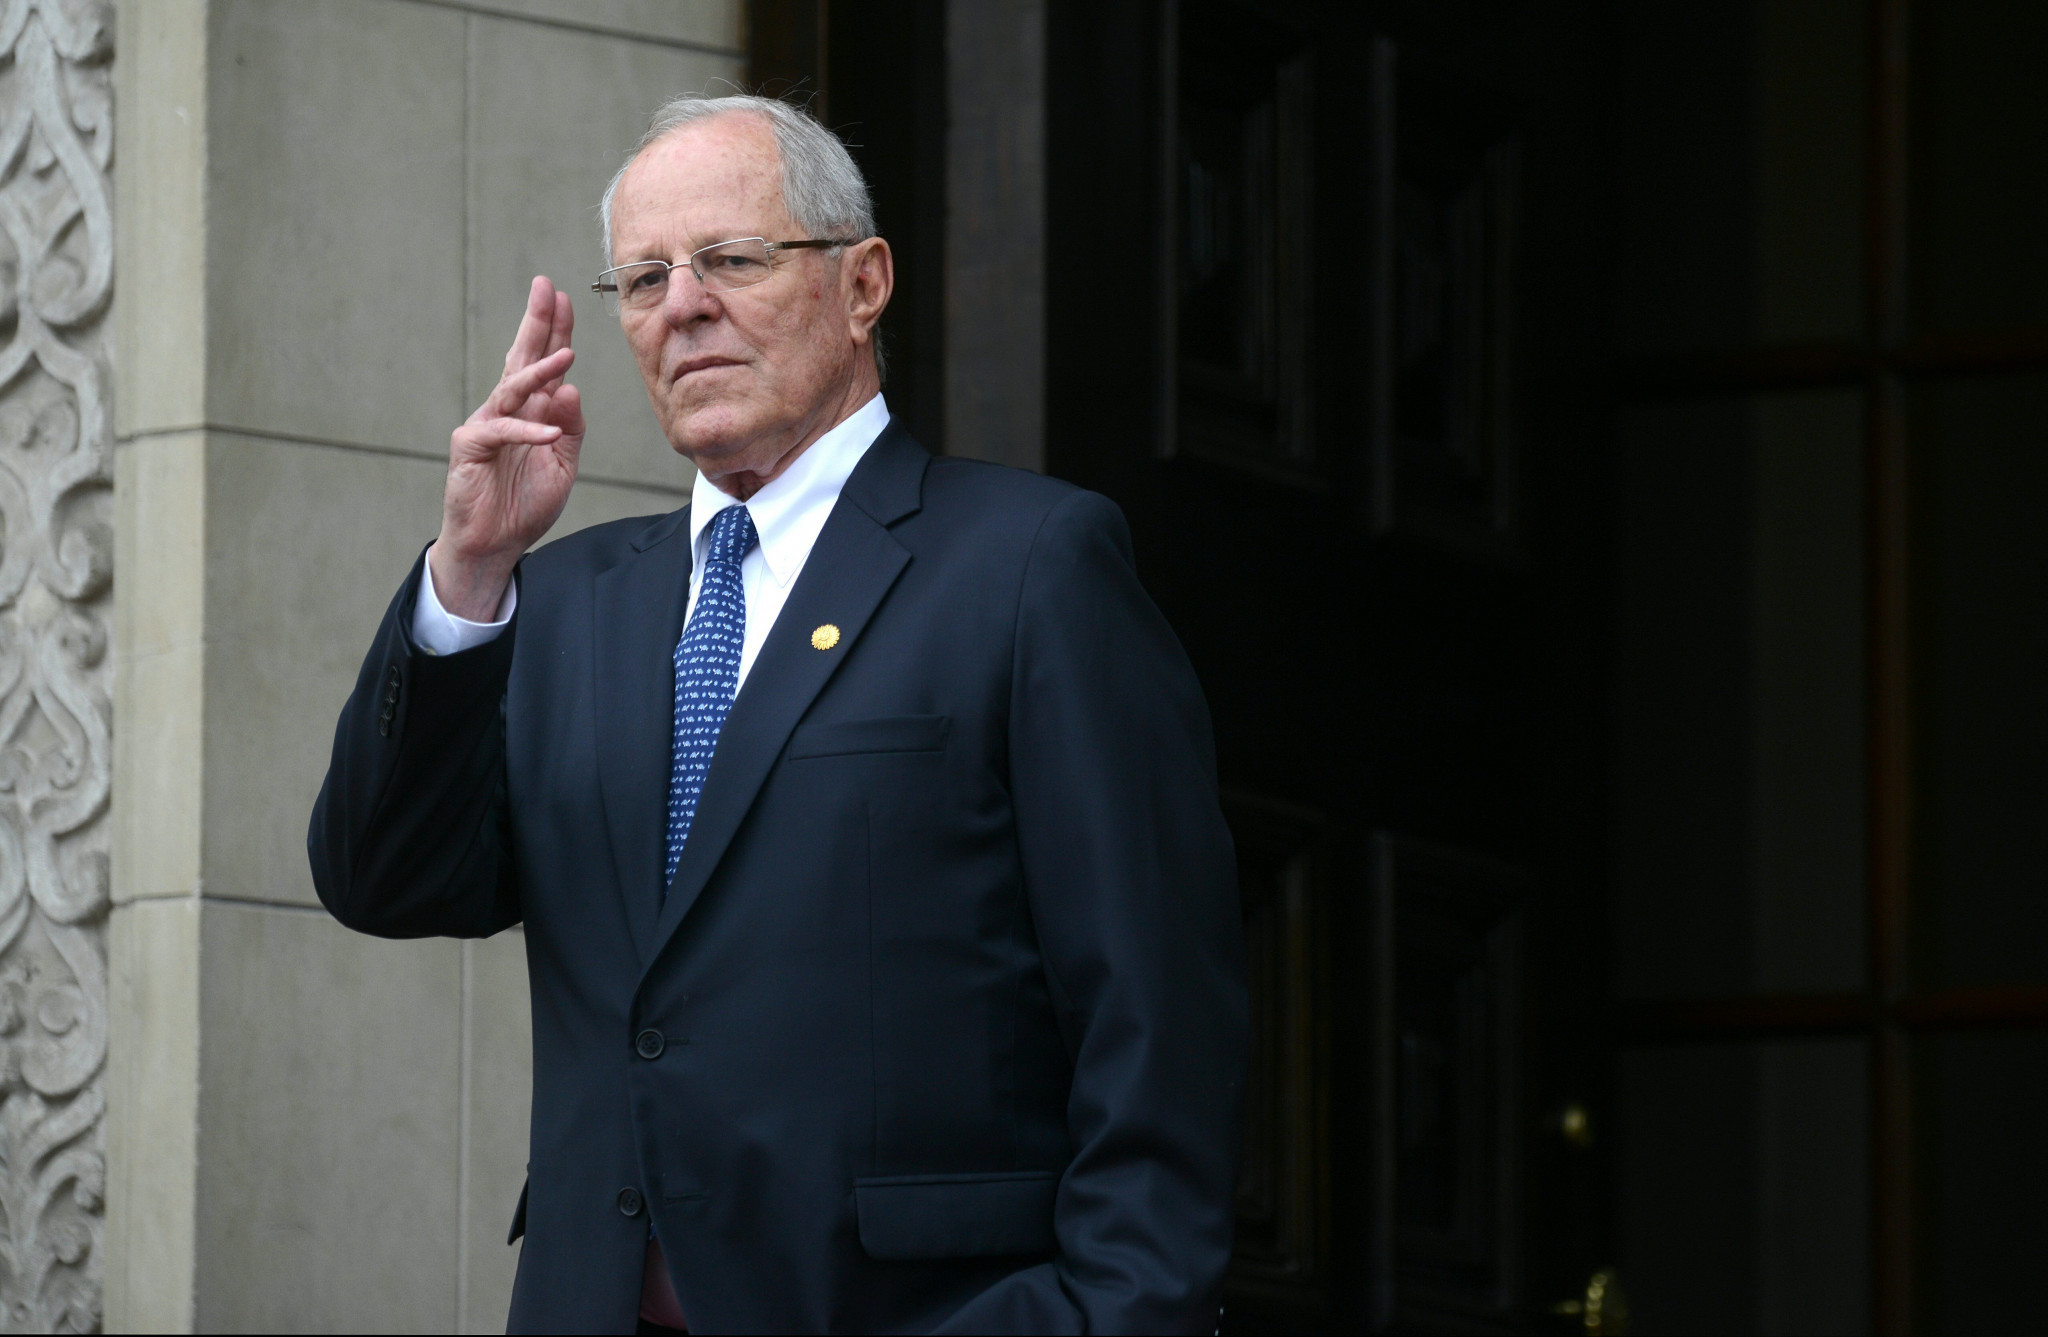 Pedro Pablo Kuczynski is due to deliver the keynote address at the IOC Session in Lima ©Getty Images